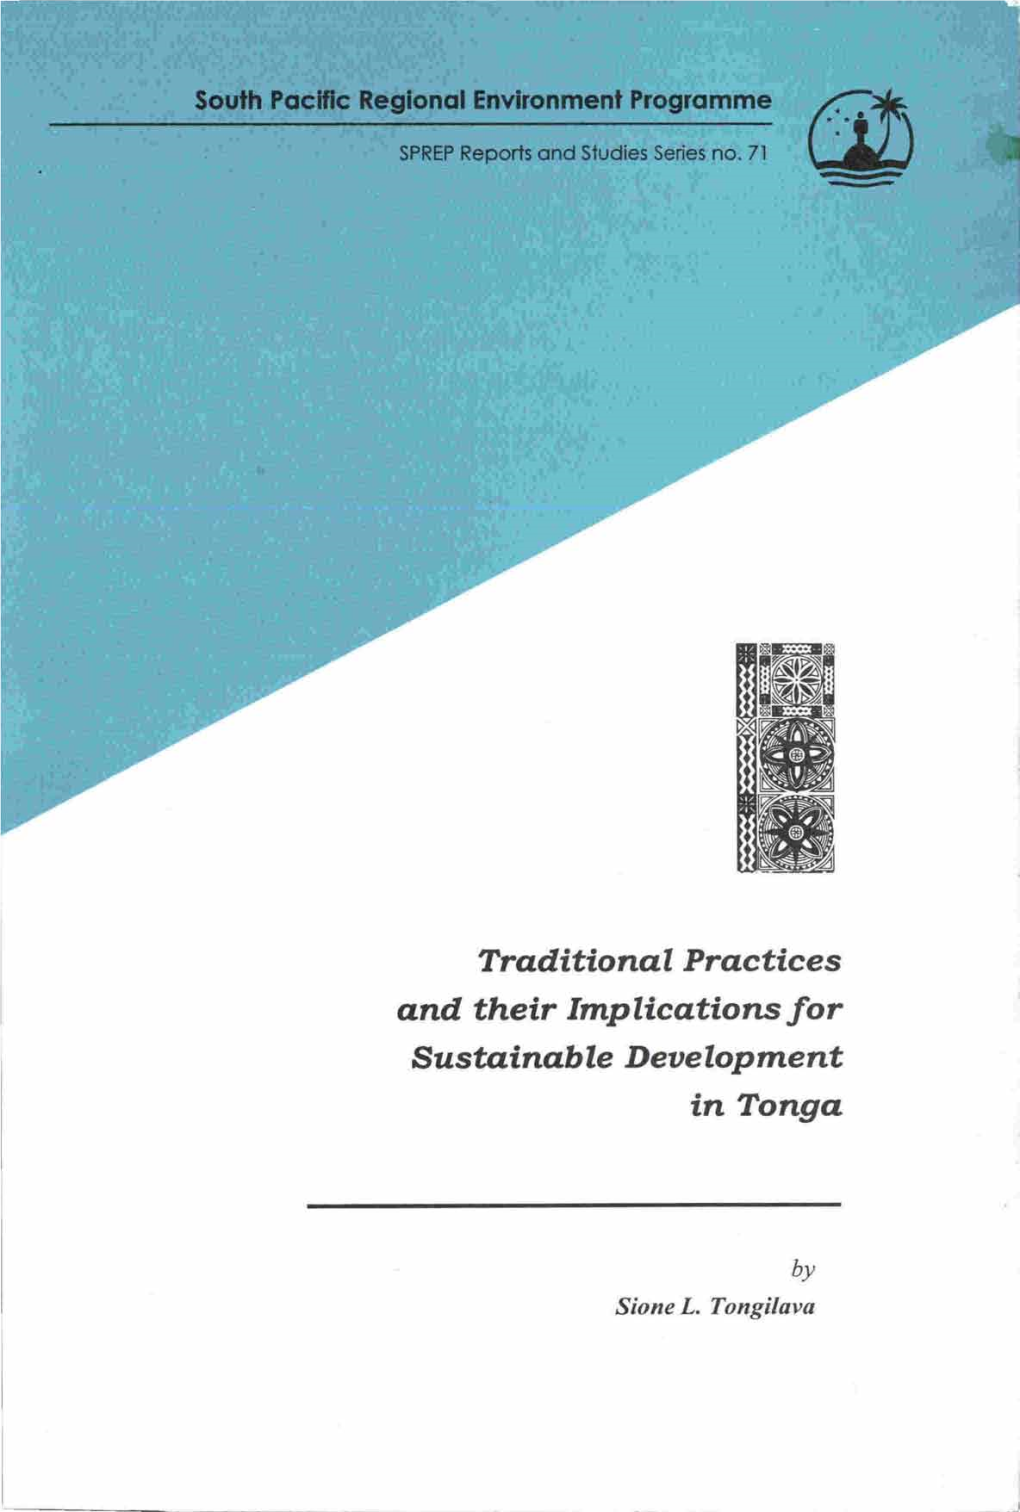 Traditional Practices and Their Implications for Susta Inable D Eaelop Ment in Tonga